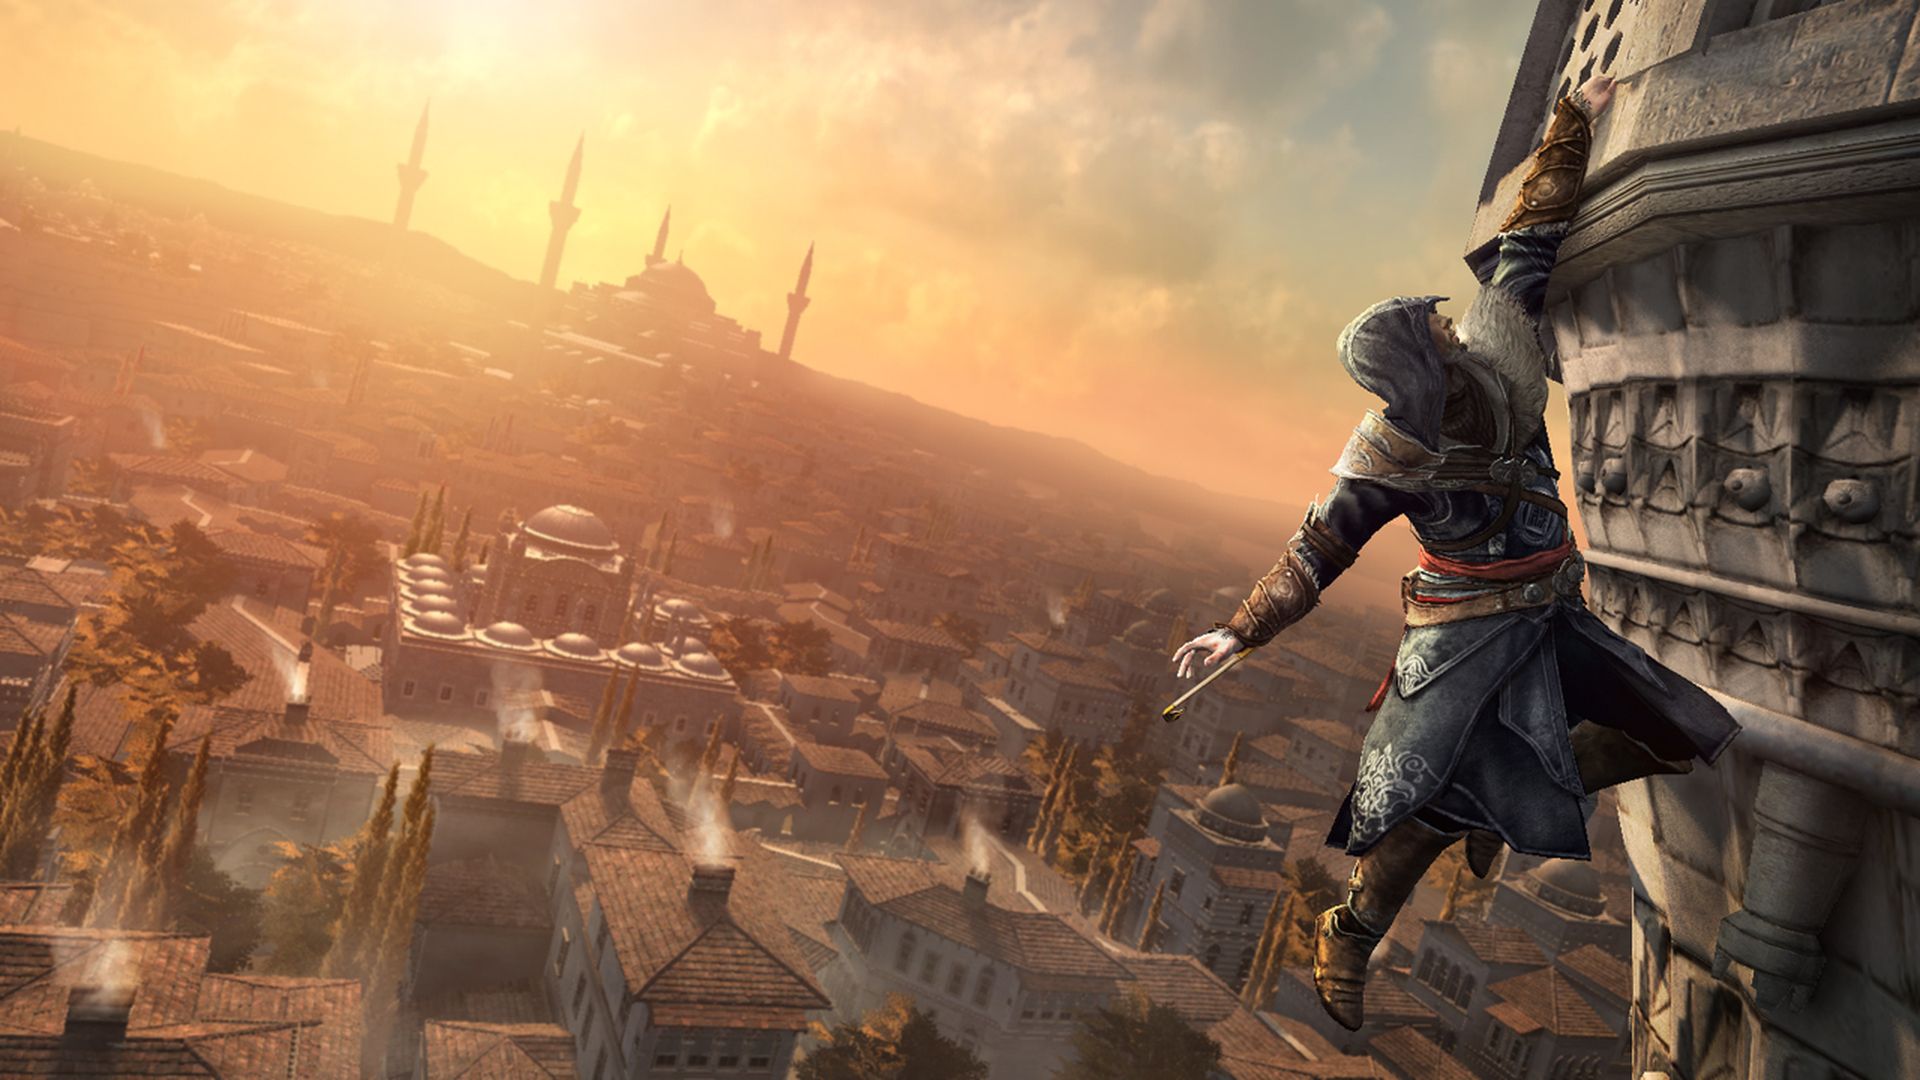 A screenshot from Assassin's Creed Revelations shows a character hanging off of a building.